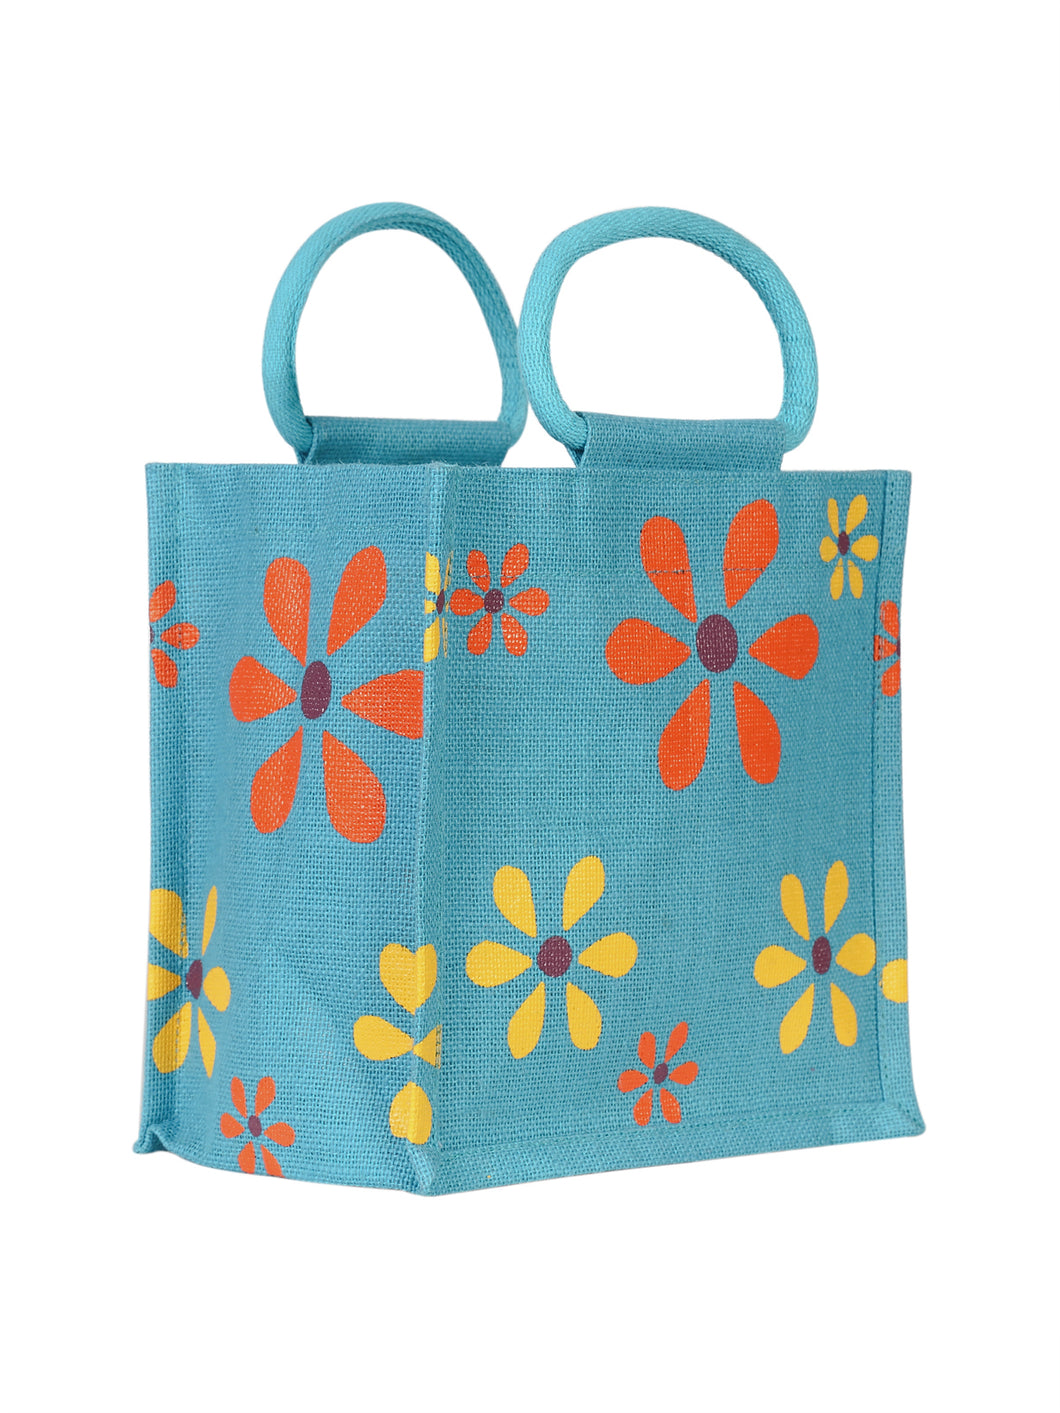 10 X 10 X 7 - MULTI FLOWER LUNCH (B-106-TURQUOISE BLUE)